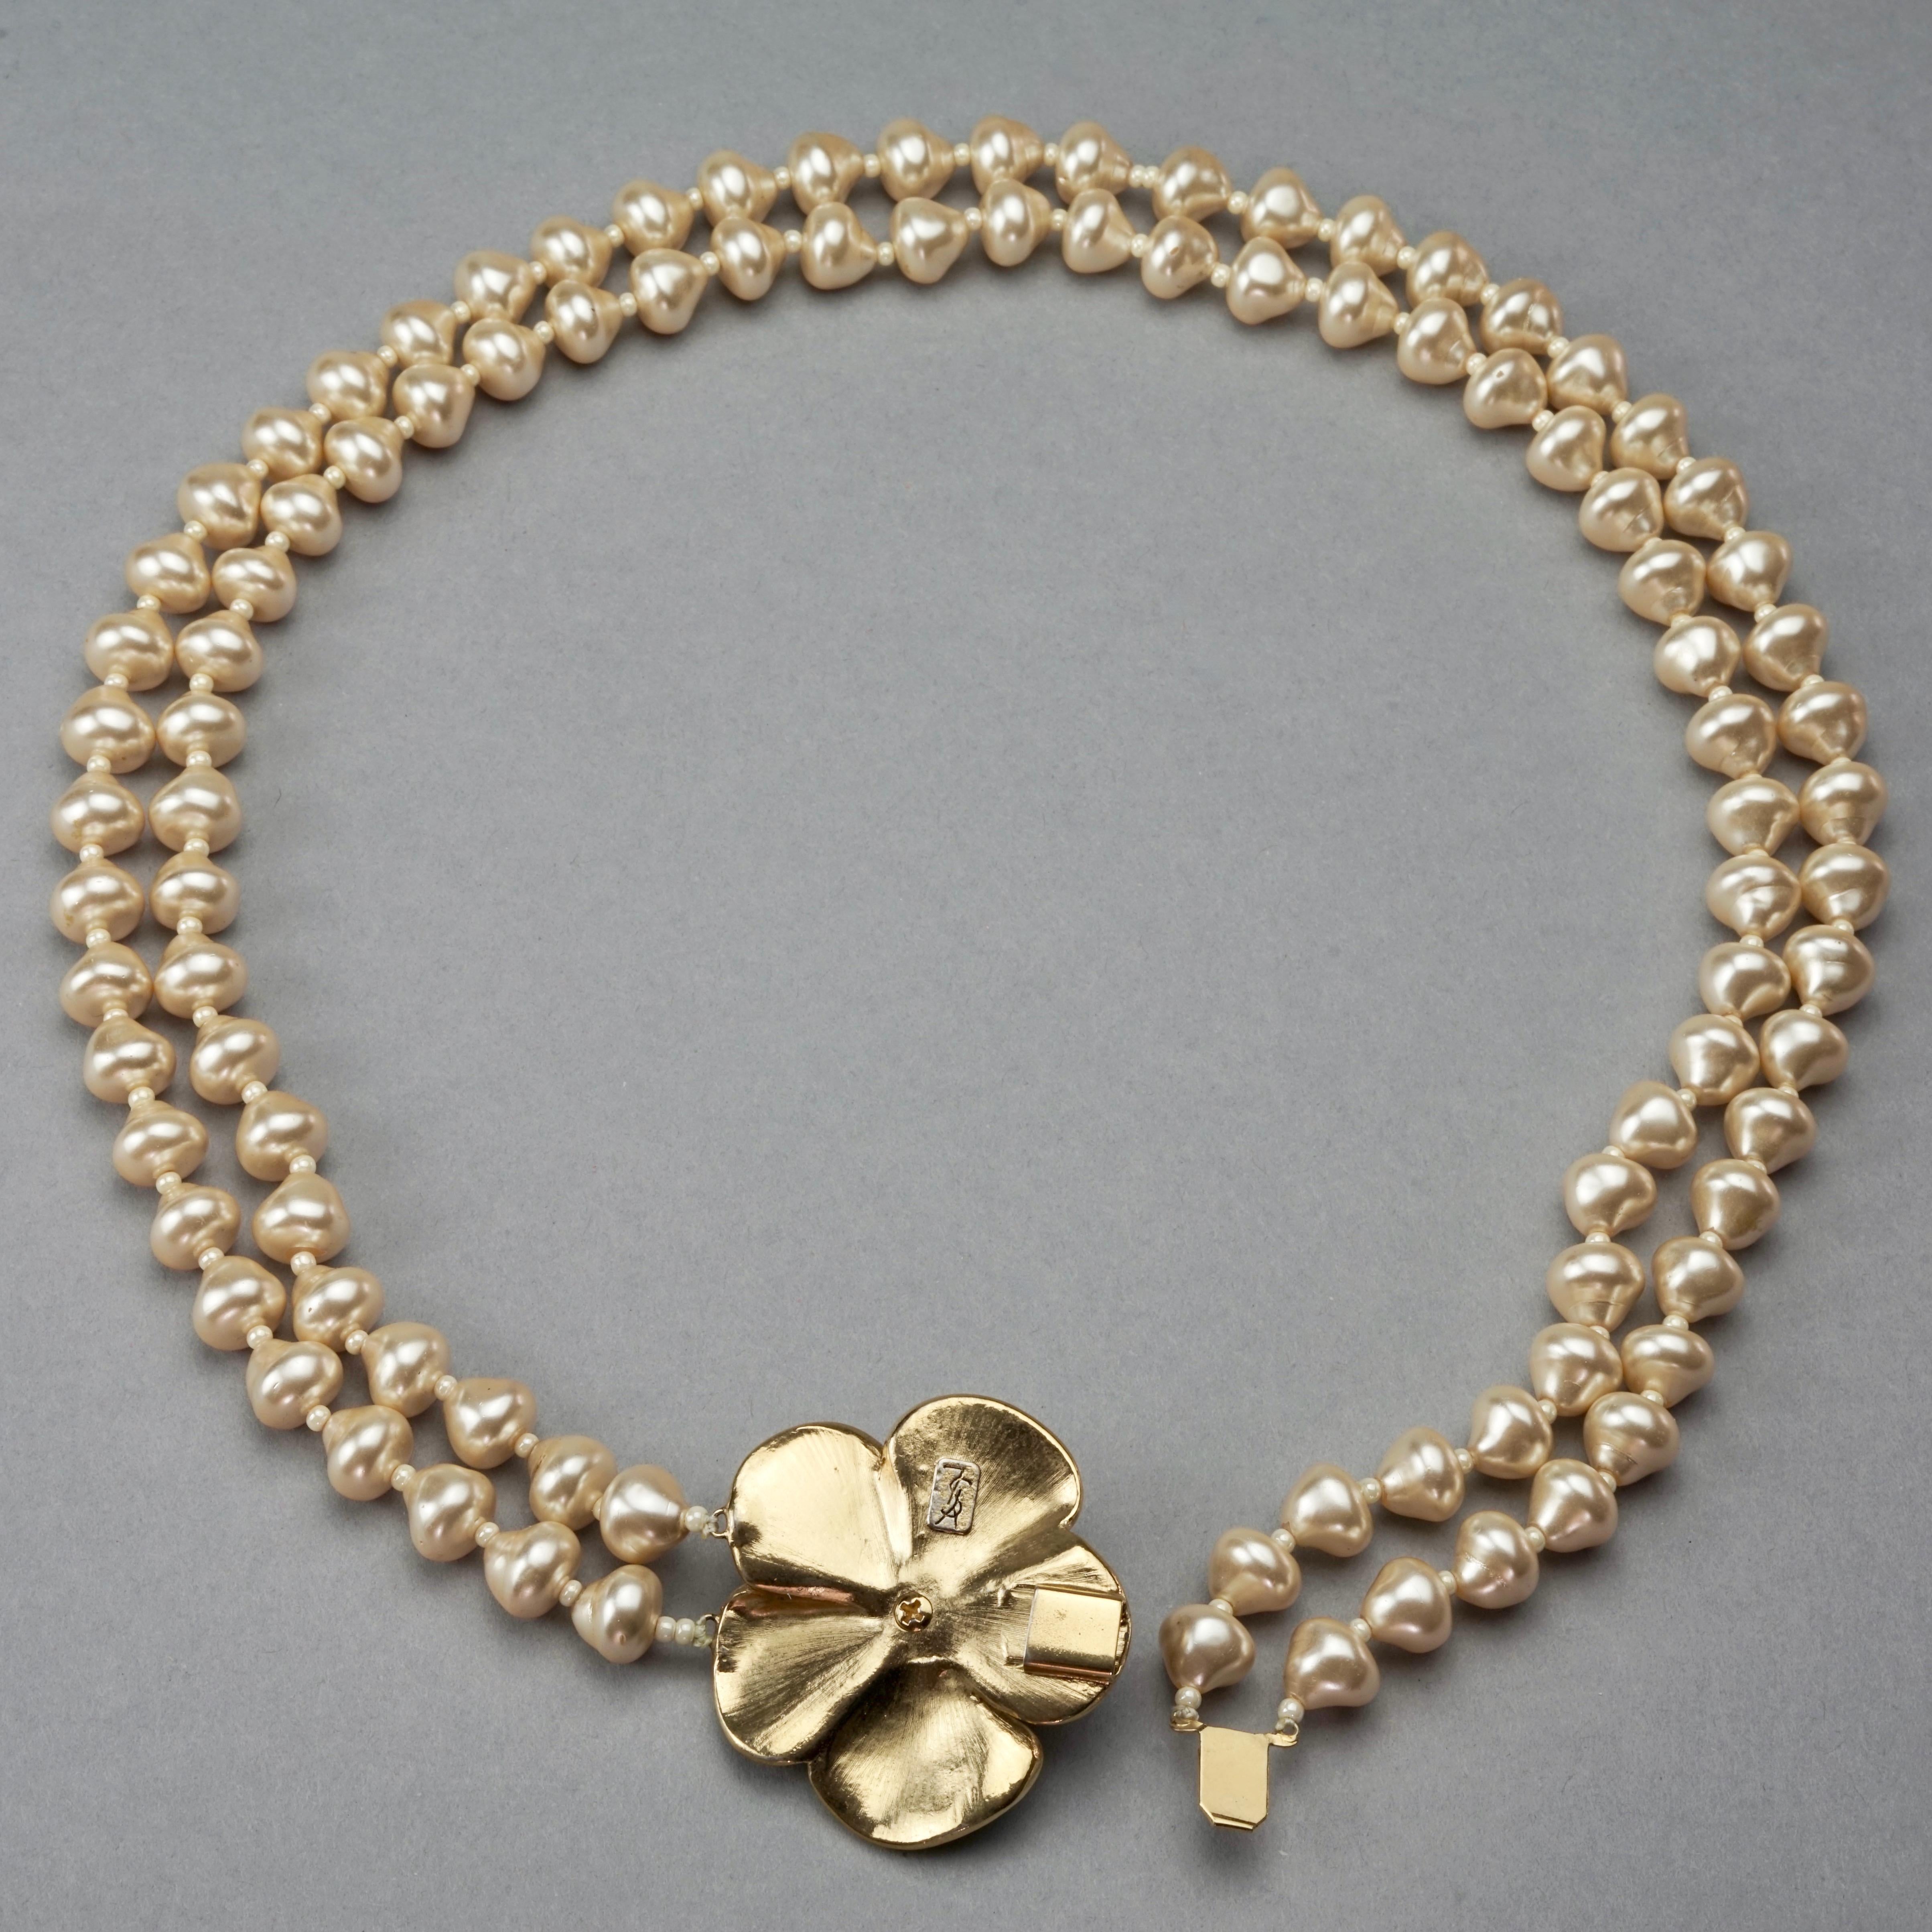 Vintage YVES SAINT LAURENT Ysl Flower Rhinestone Double Strand Pearl Necklace For Sale 5